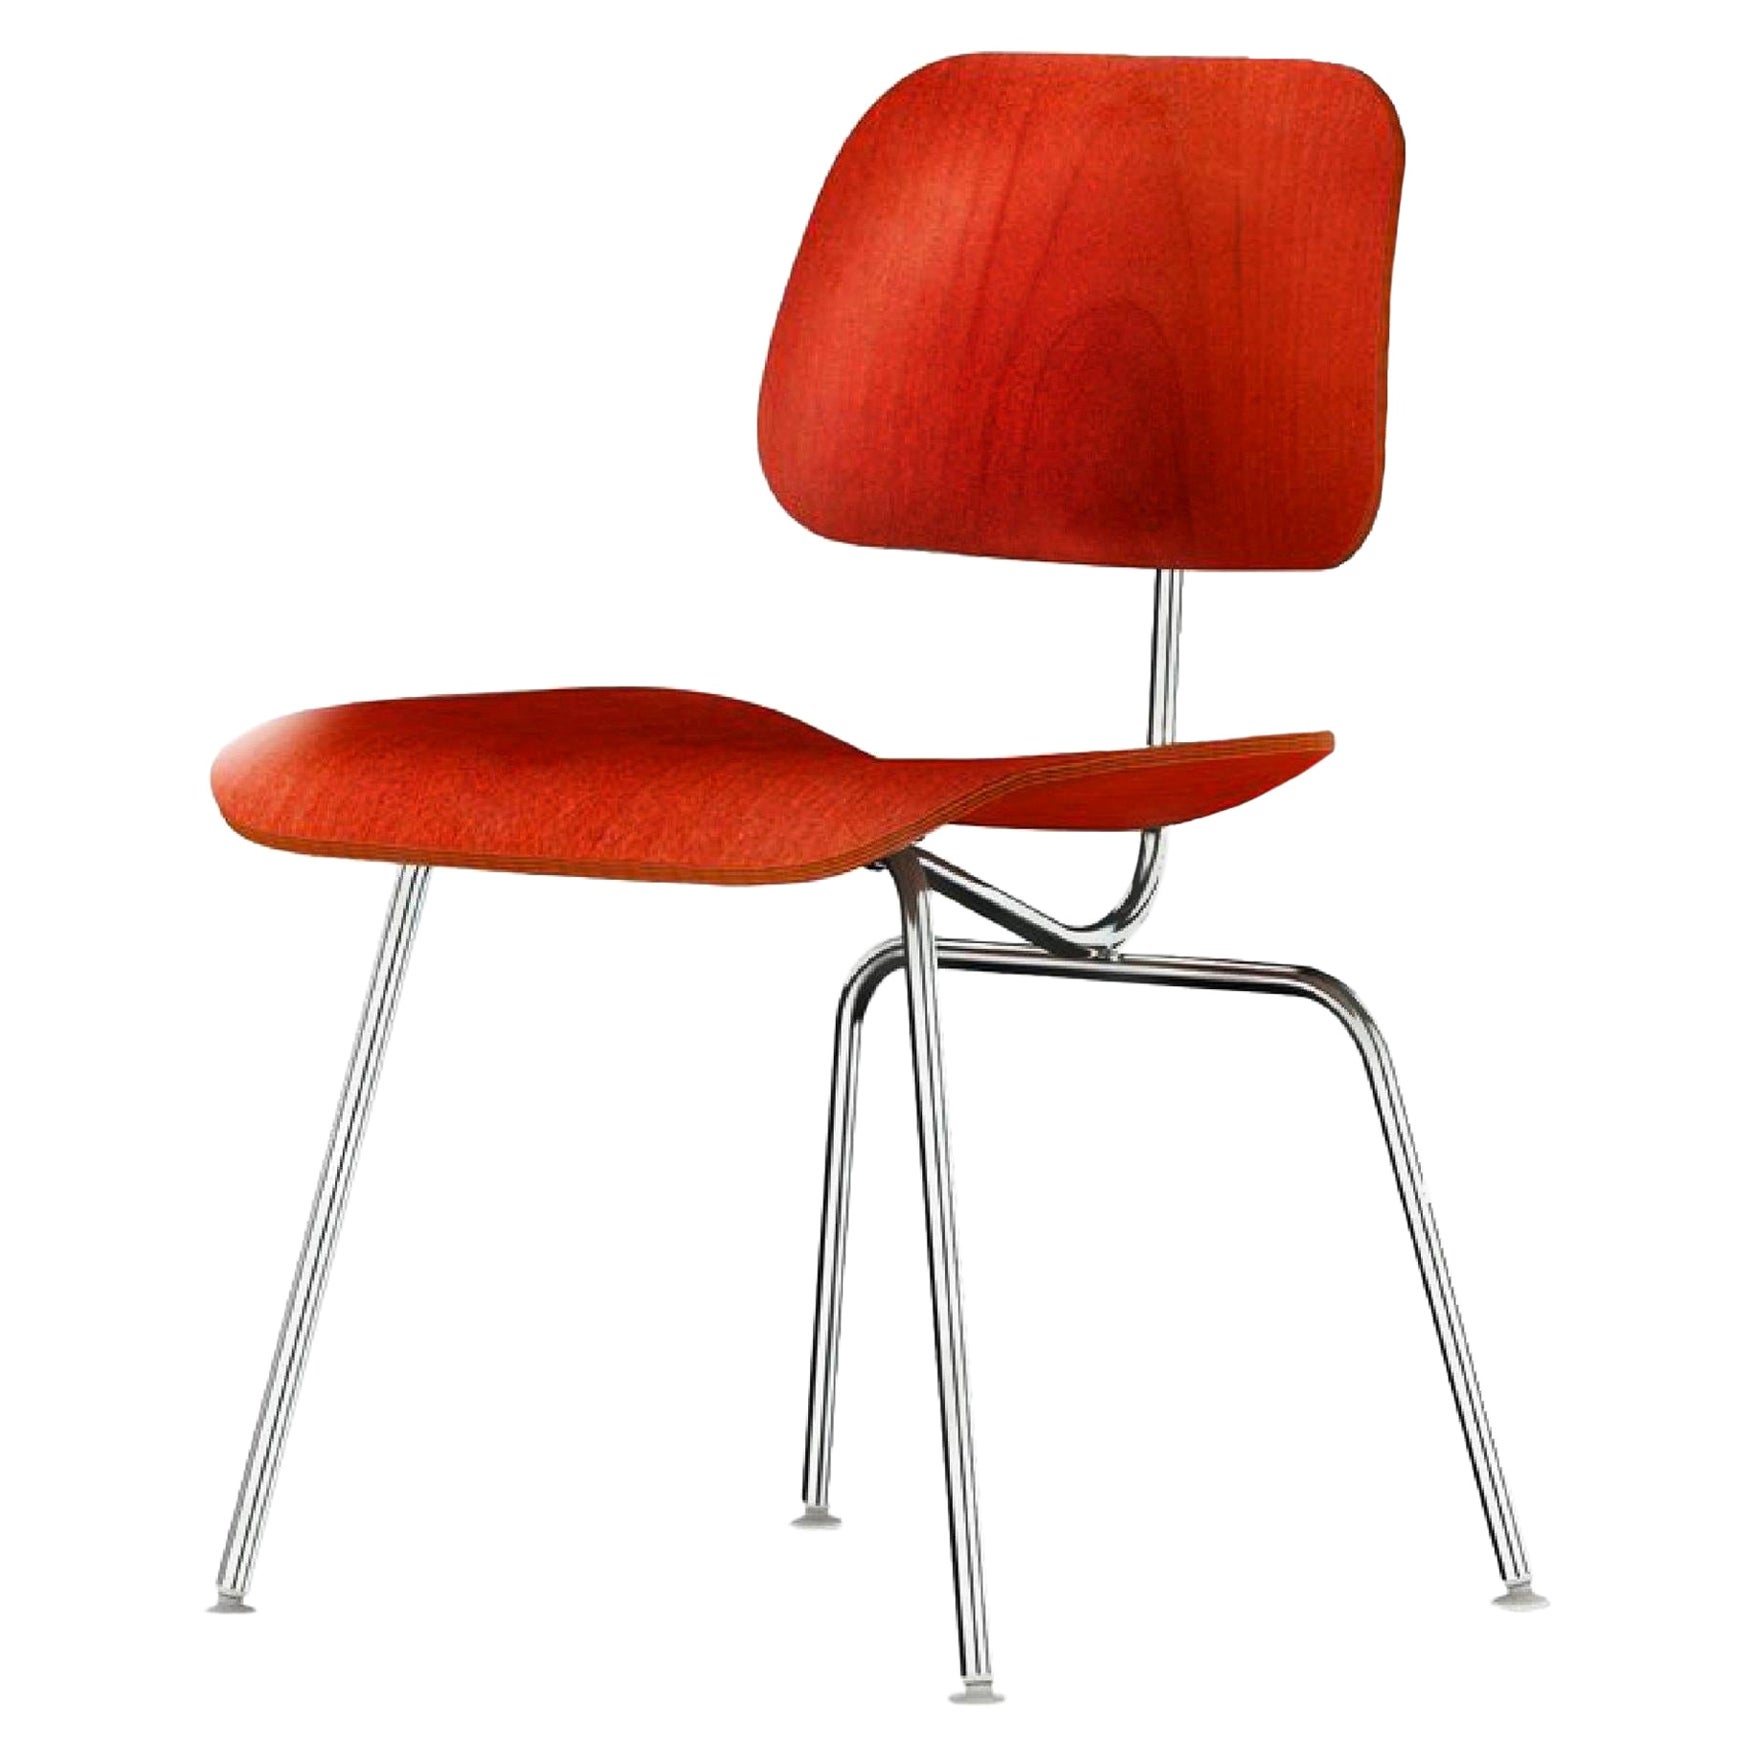 Charles and Ray Eames Red Beech DCM Chair, Herman Miller, Dining, Side Chair